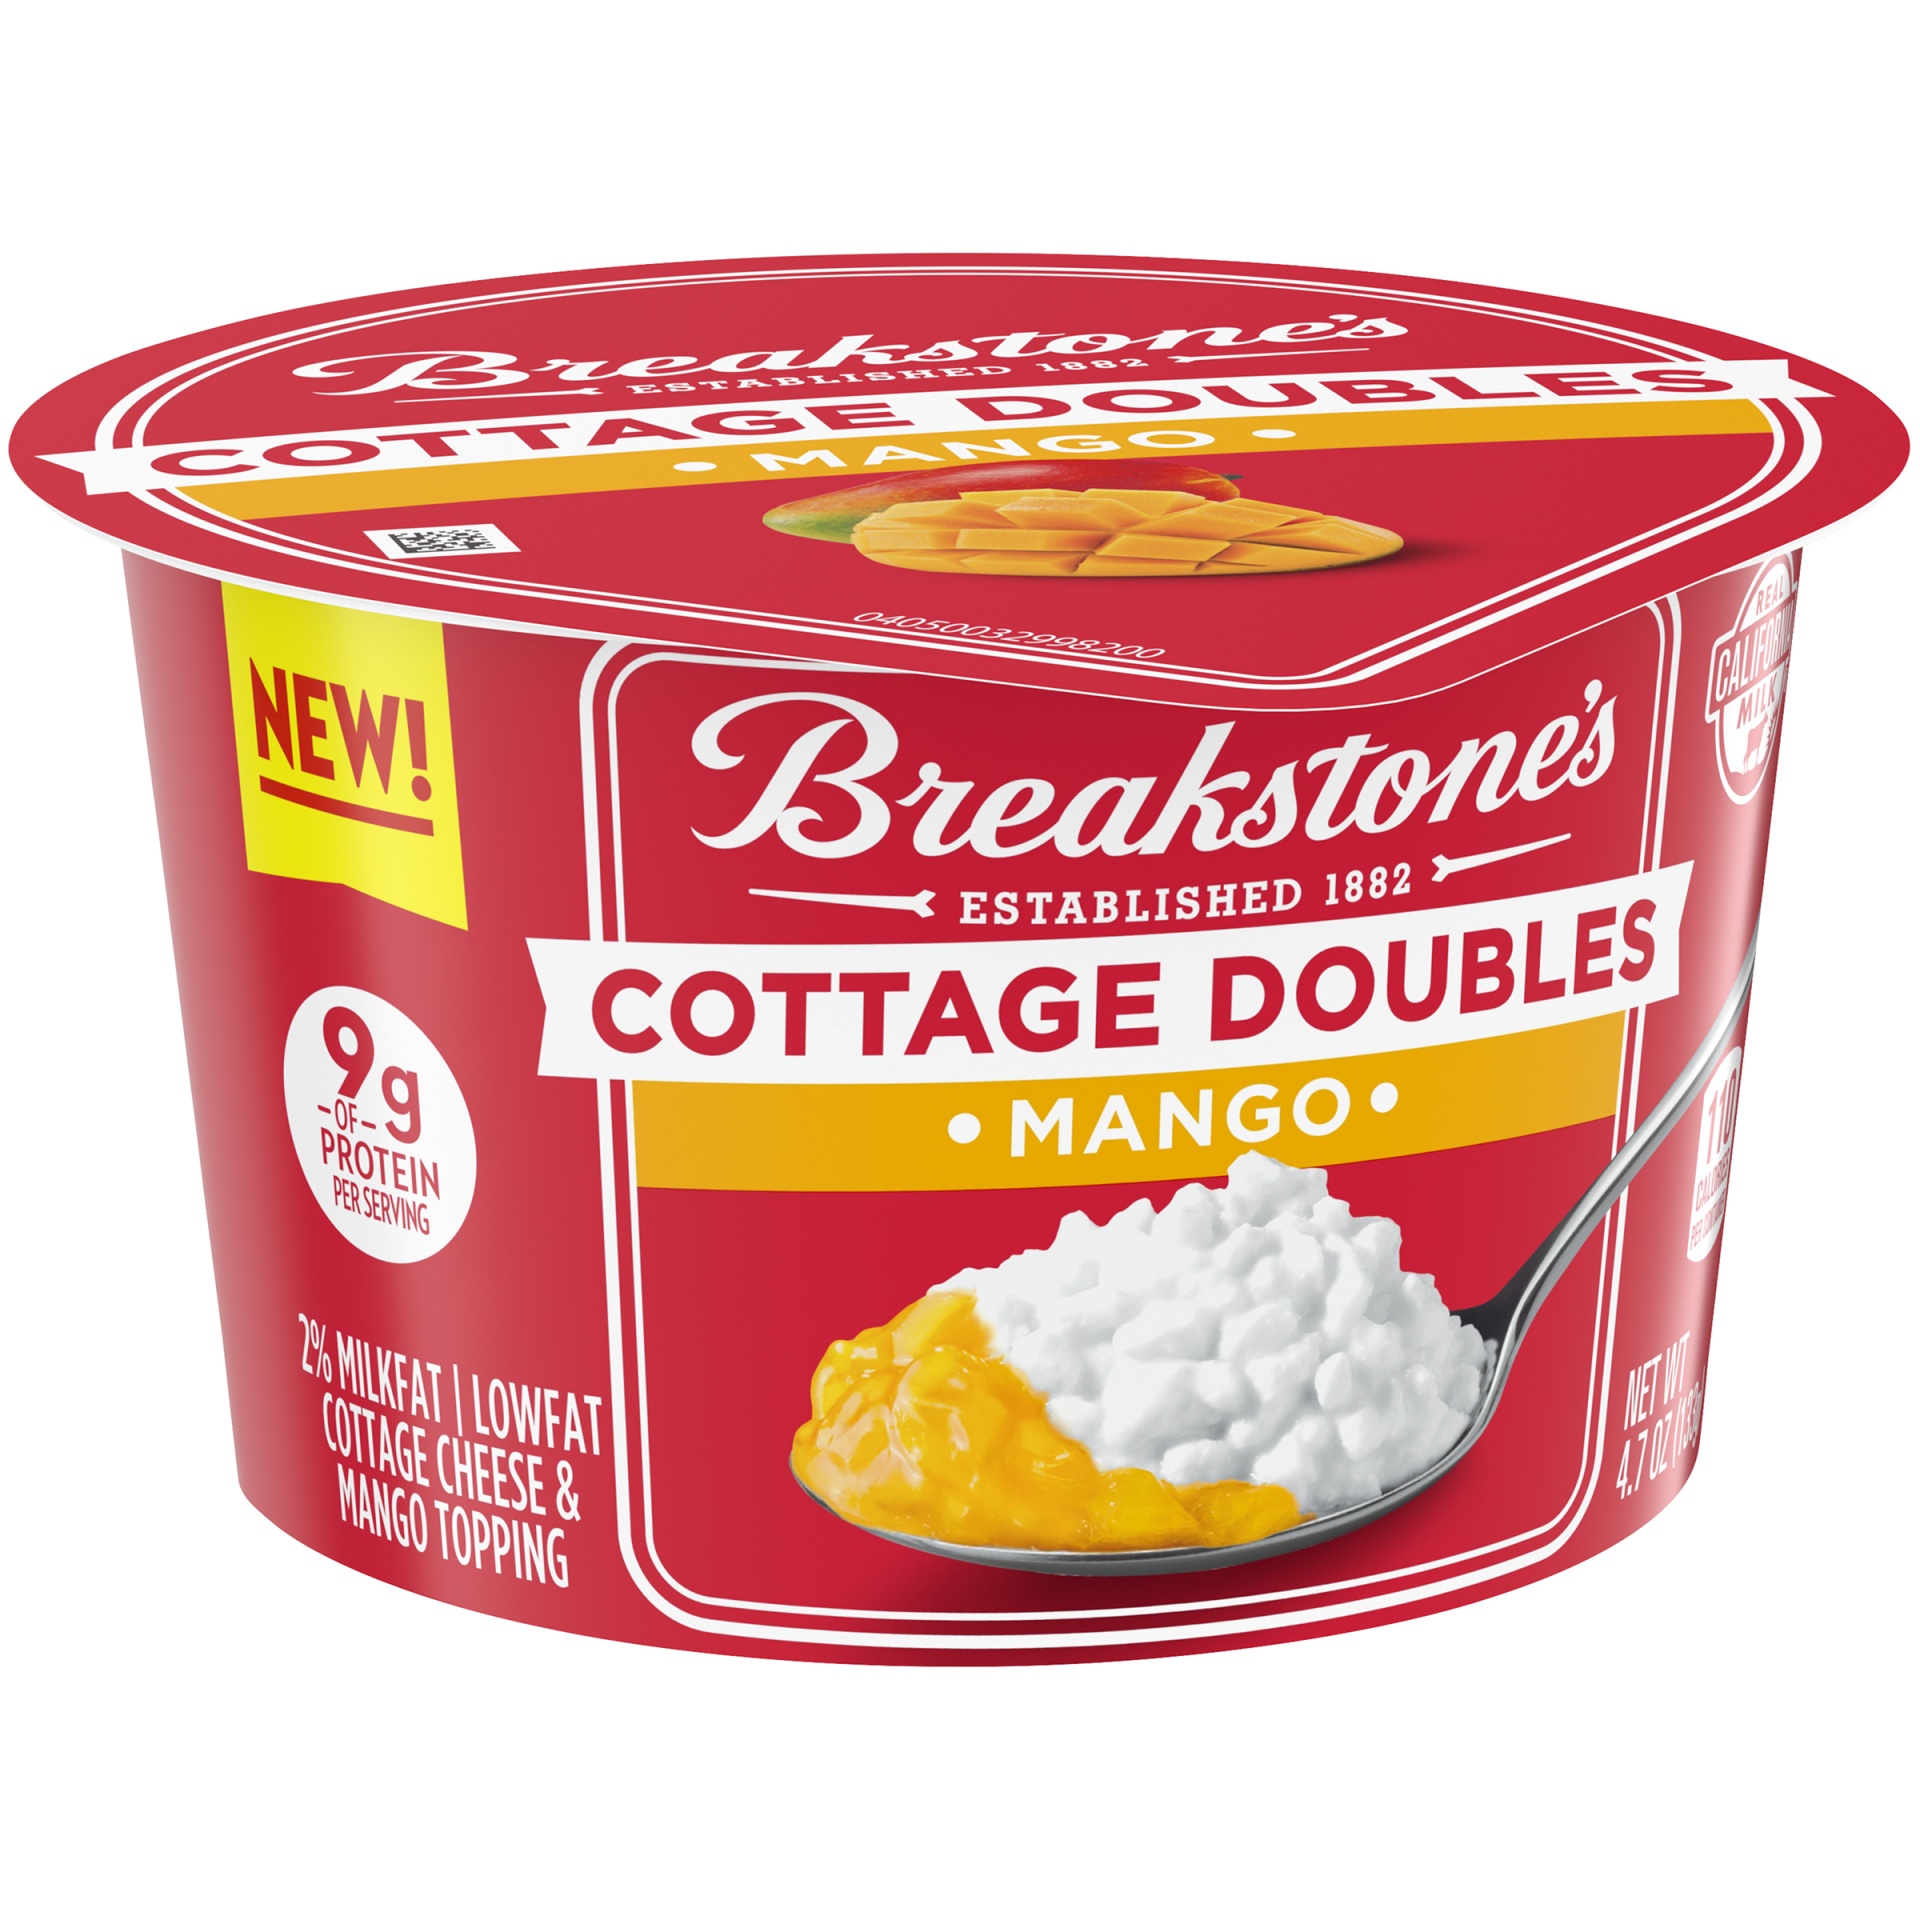 slide 2 of 6, Breakstone's Cottage Doubles Lowfat Cottage Cheese & Mango Topping with 2% Milkfat Cup, 4.7 oz